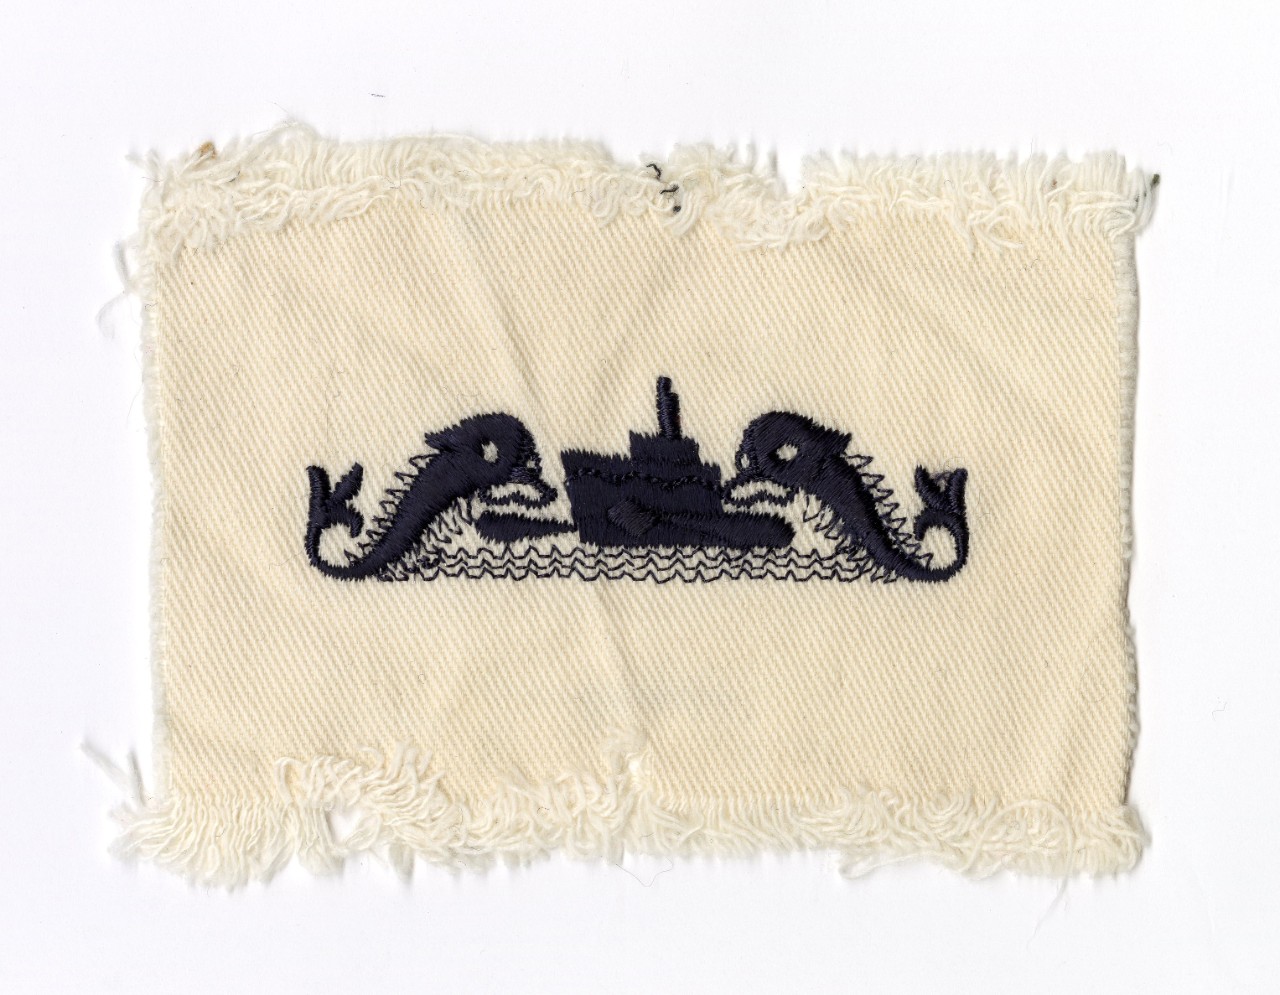 embroidered design in blue thread on white cloth of two fish flanking a submarine